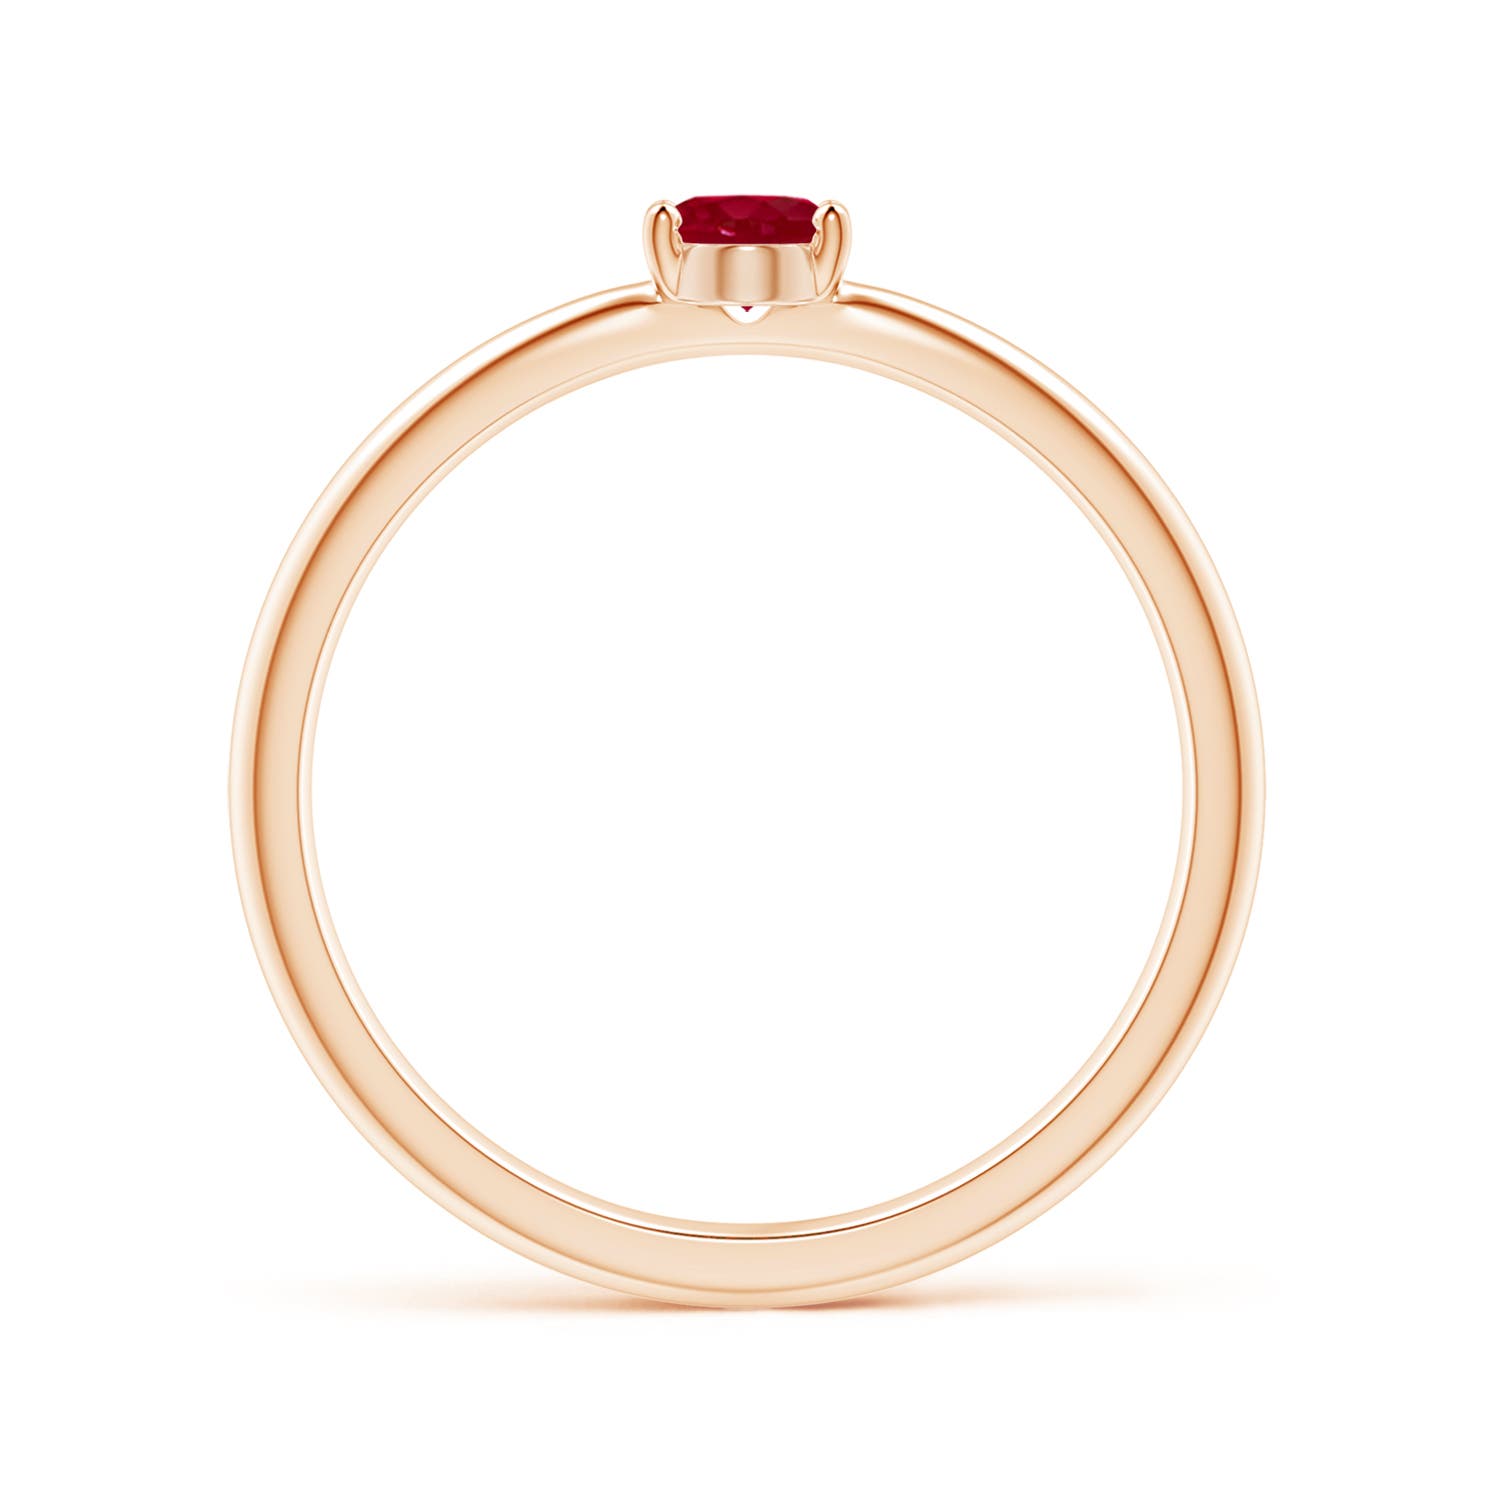 AA - Ruby / 0.4 CT / 14 KT Rose Gold